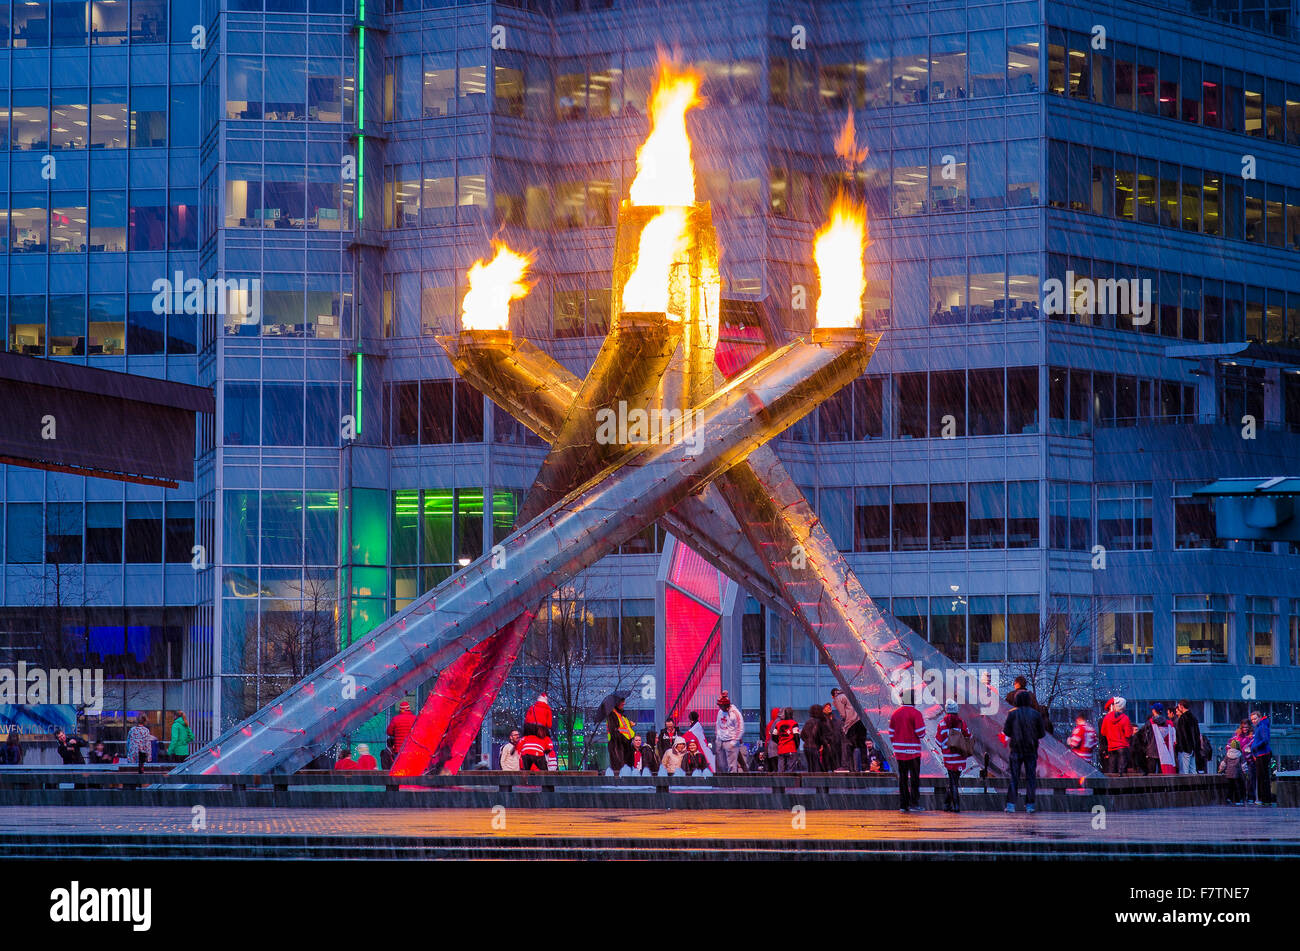 Canadians celebrate the 2014 Olympic Hockey gold medals by gathering at the 2010 Olympic flame cauldron in Vancouver, British Co Stock Photo